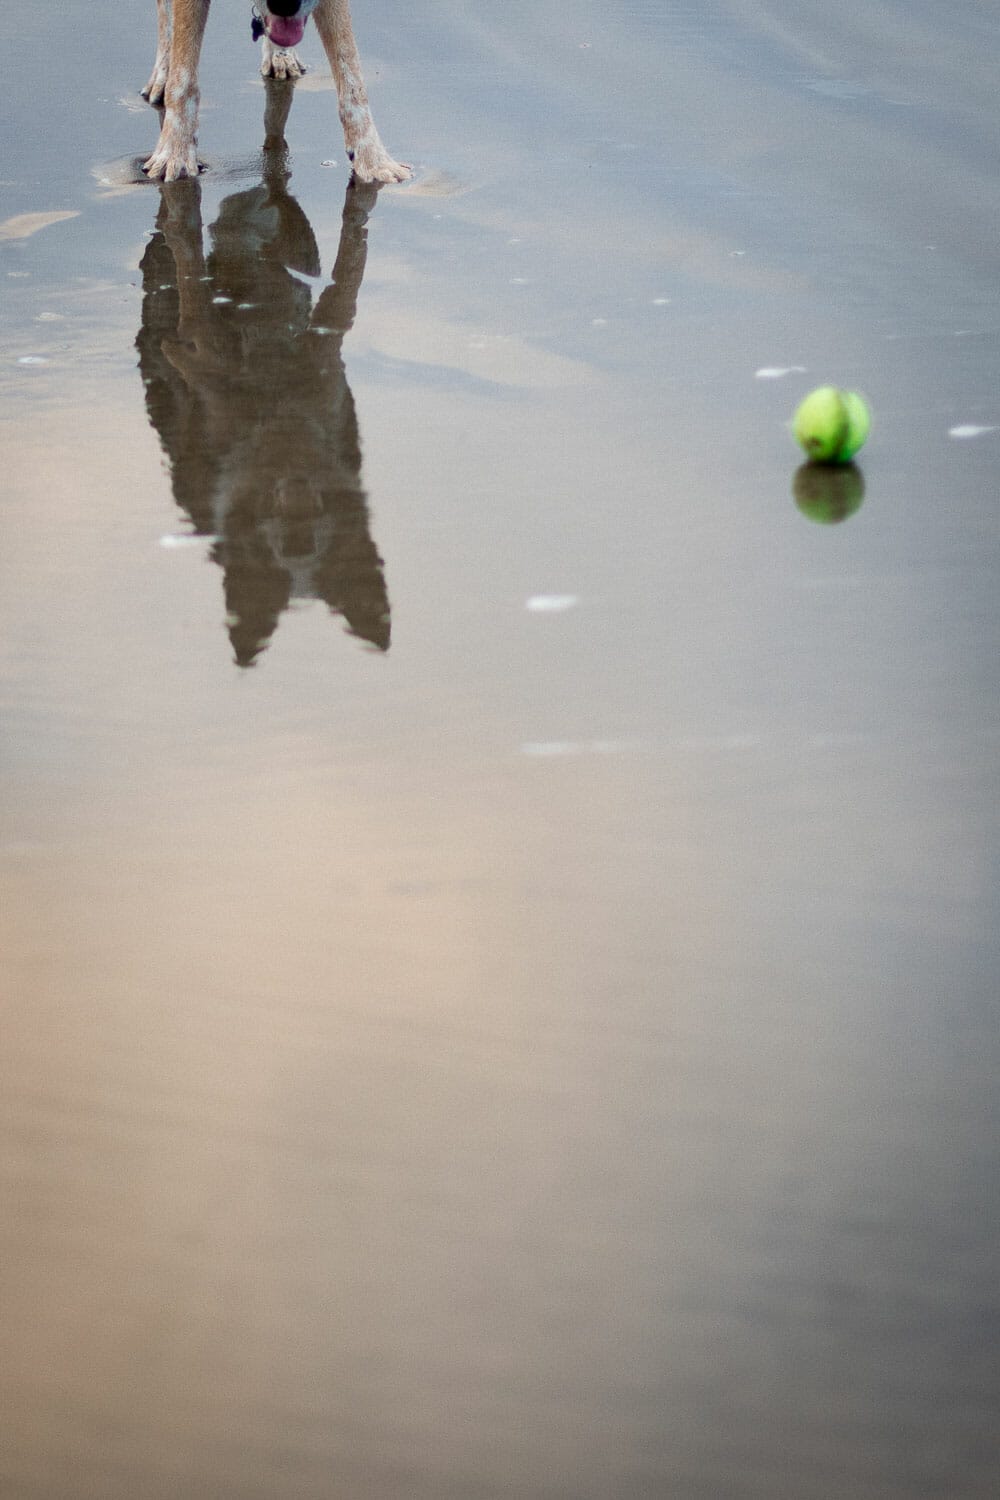 Dog standing in water looking at a tennis ball.